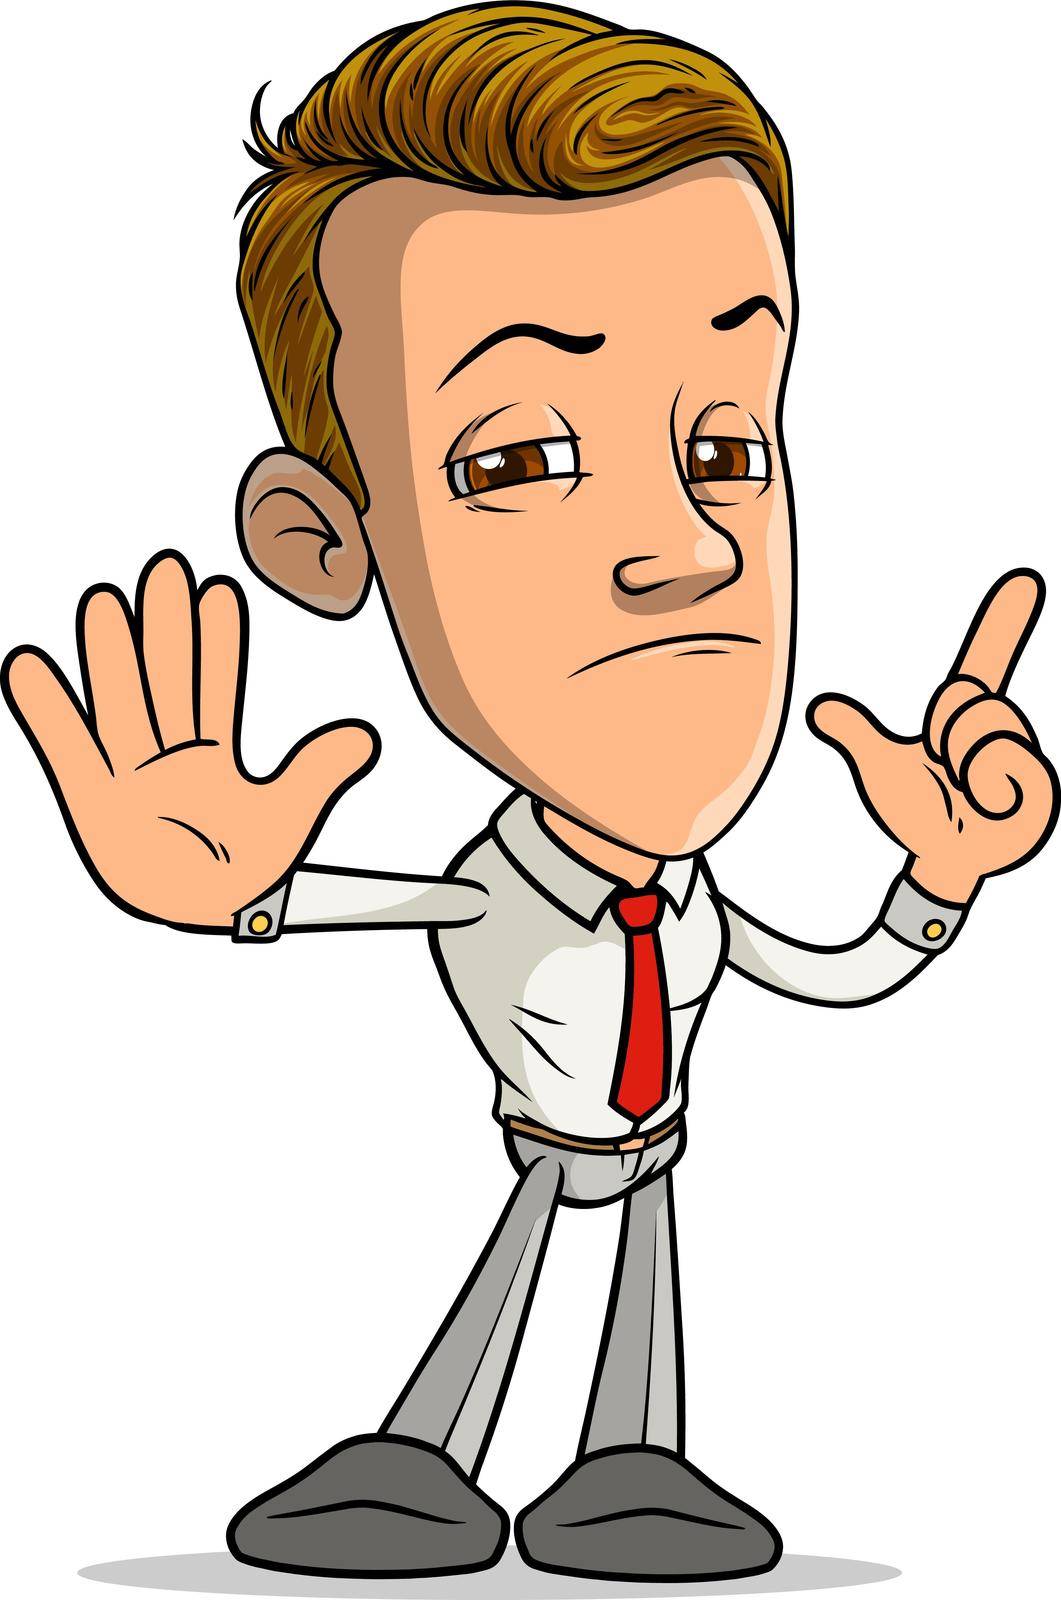 Cartoon brunette standing funny smiling boy character showing stop forefinger up gesture sign with red tie. Isolated on white background. Vector icon.